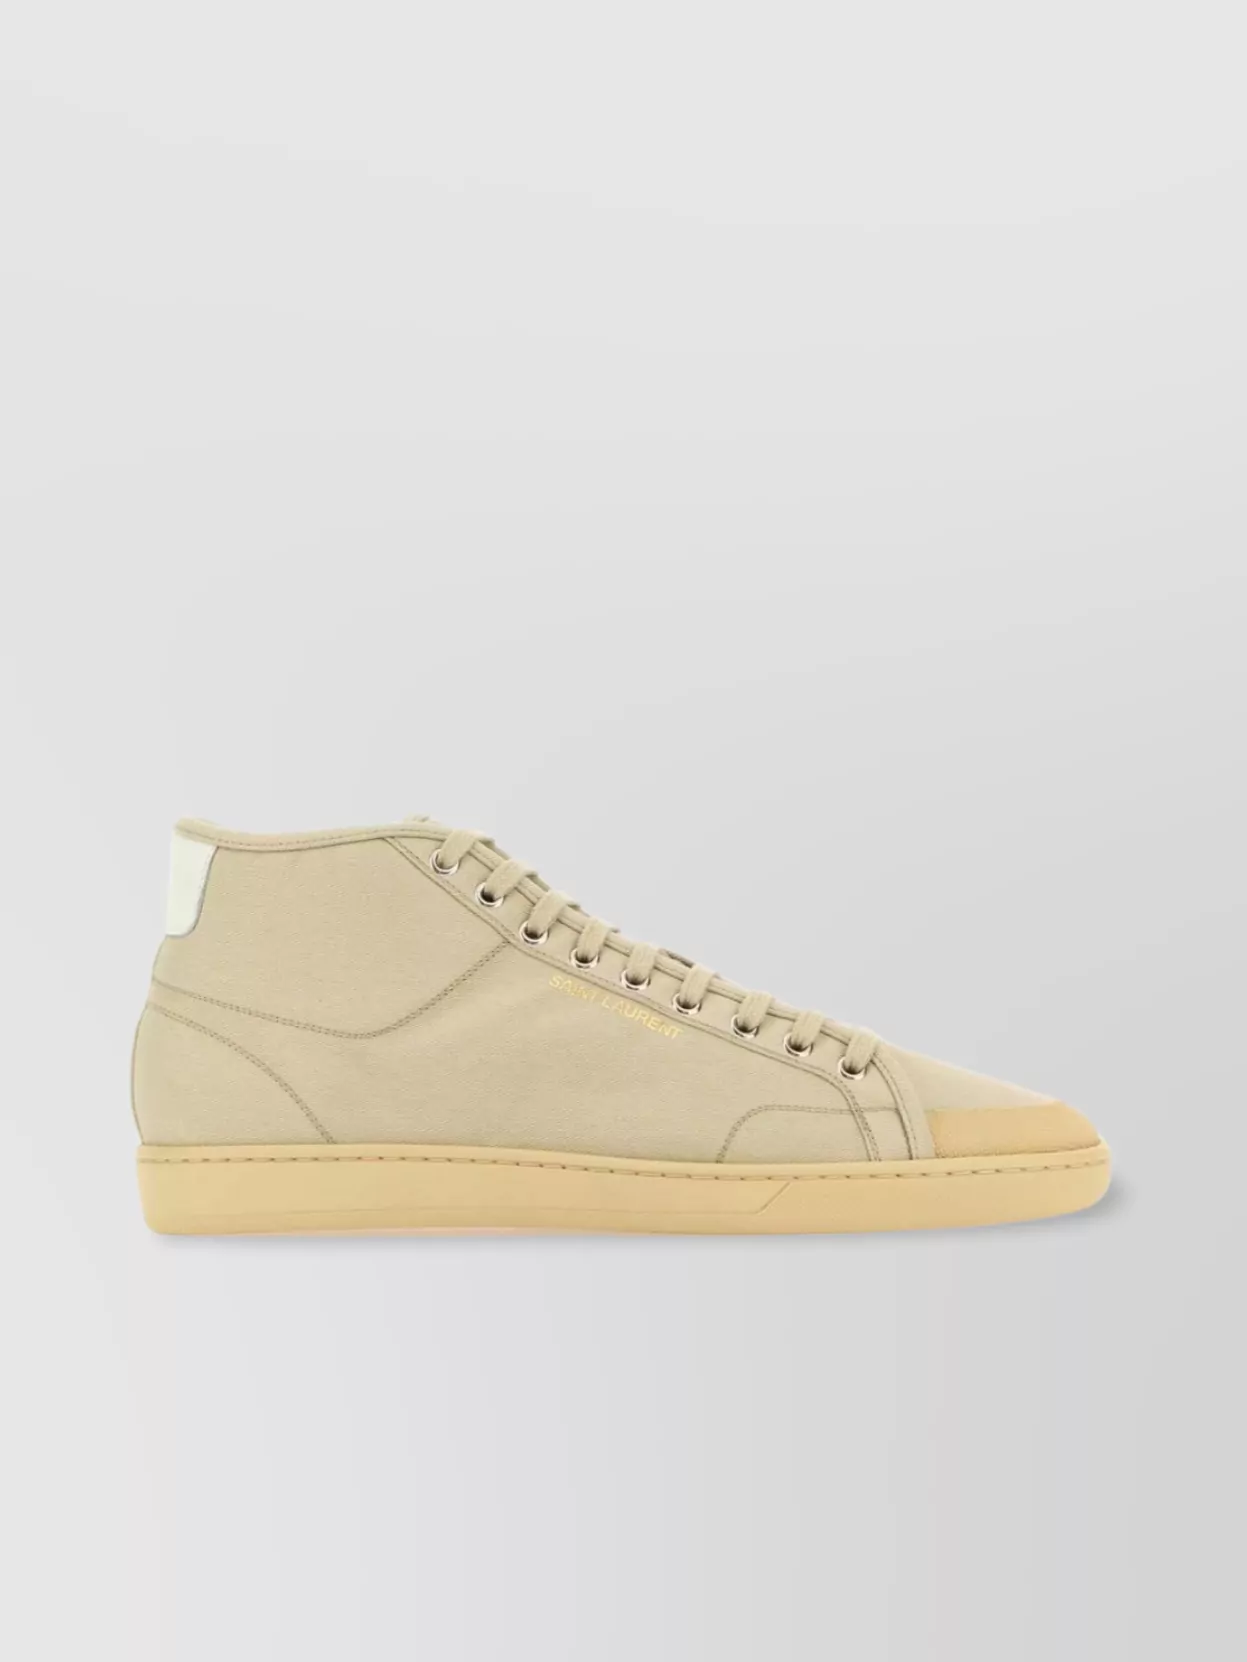 Saint Laurent Canvas High-top Sneakers Round Toe In Neutral